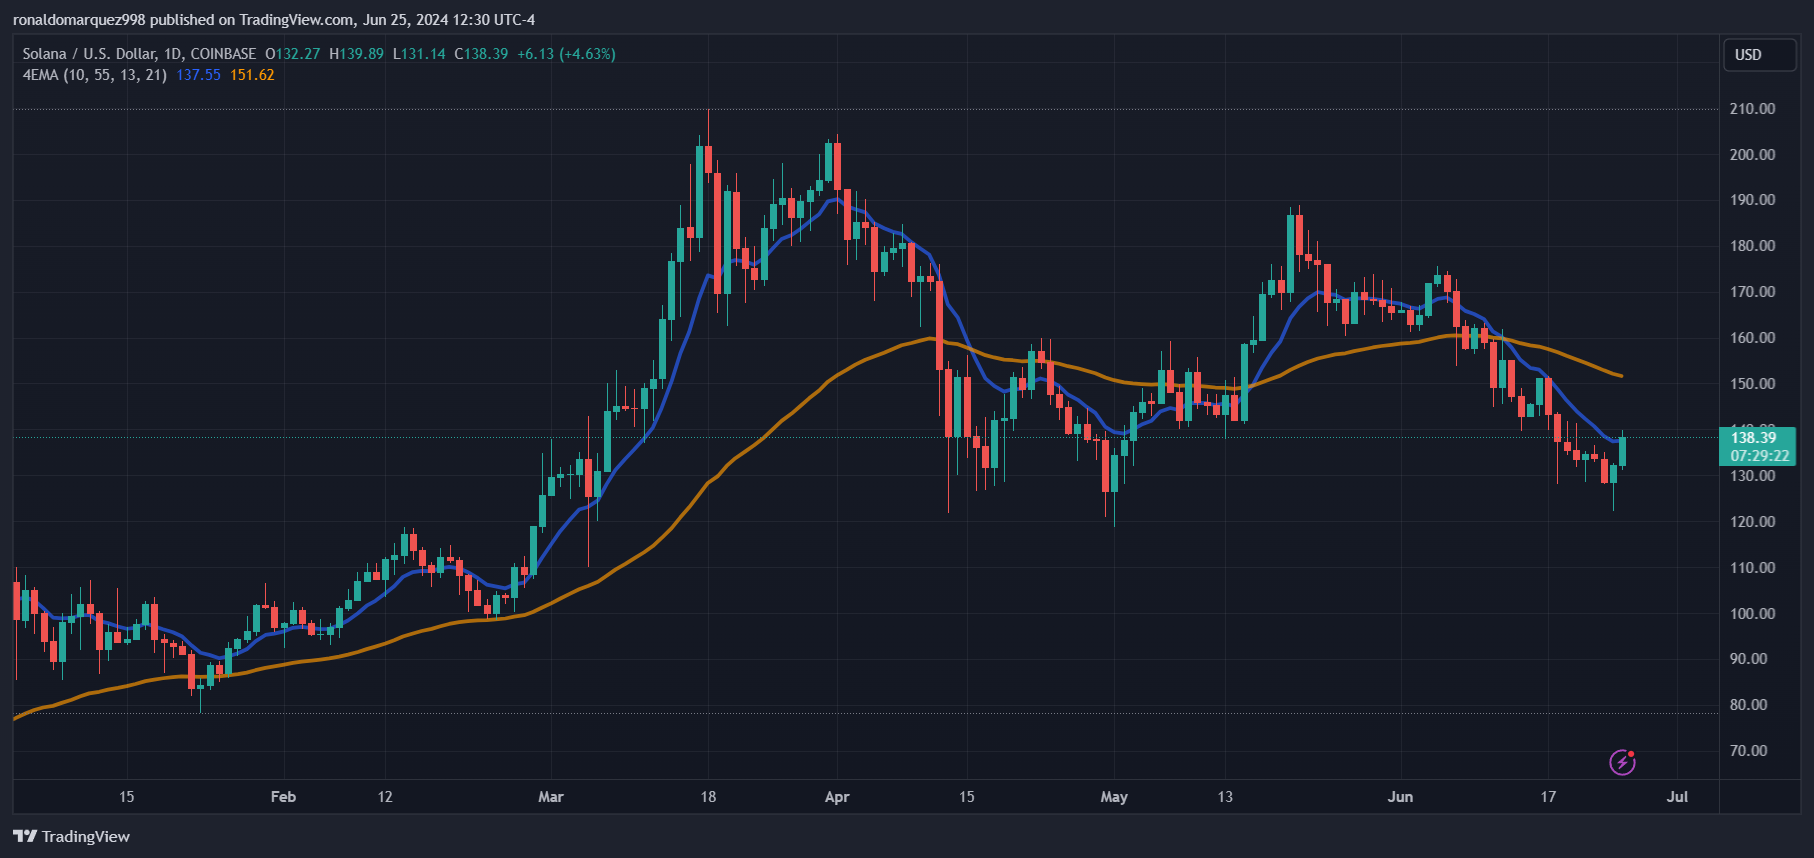 COINBASE:SOLUSD Chart Image by ronaldomarquez998